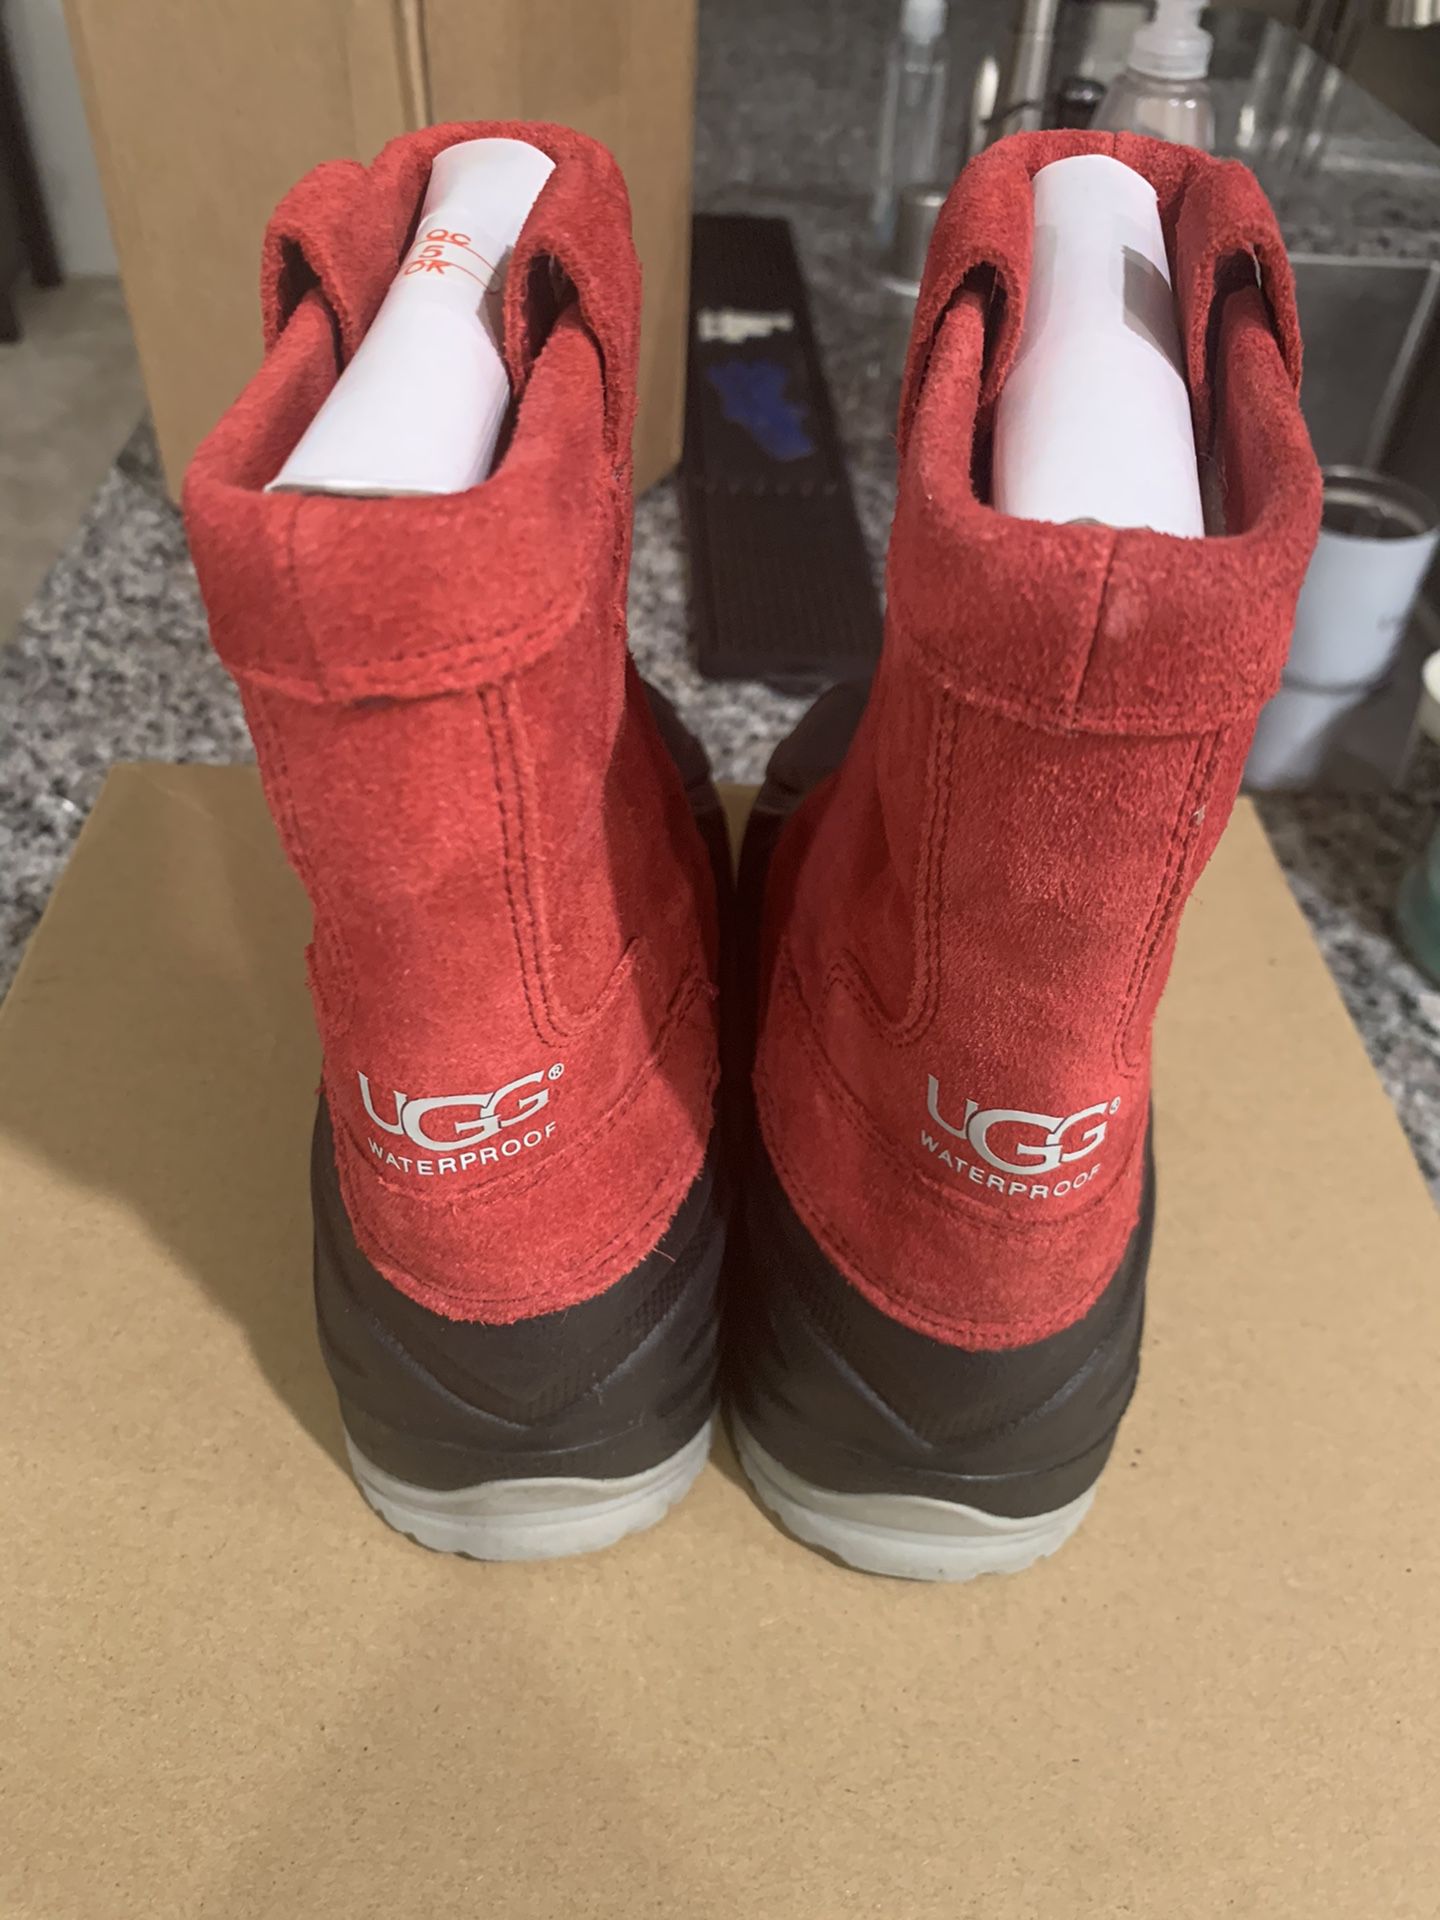 Ugg Kids Size 11 Snow Boots